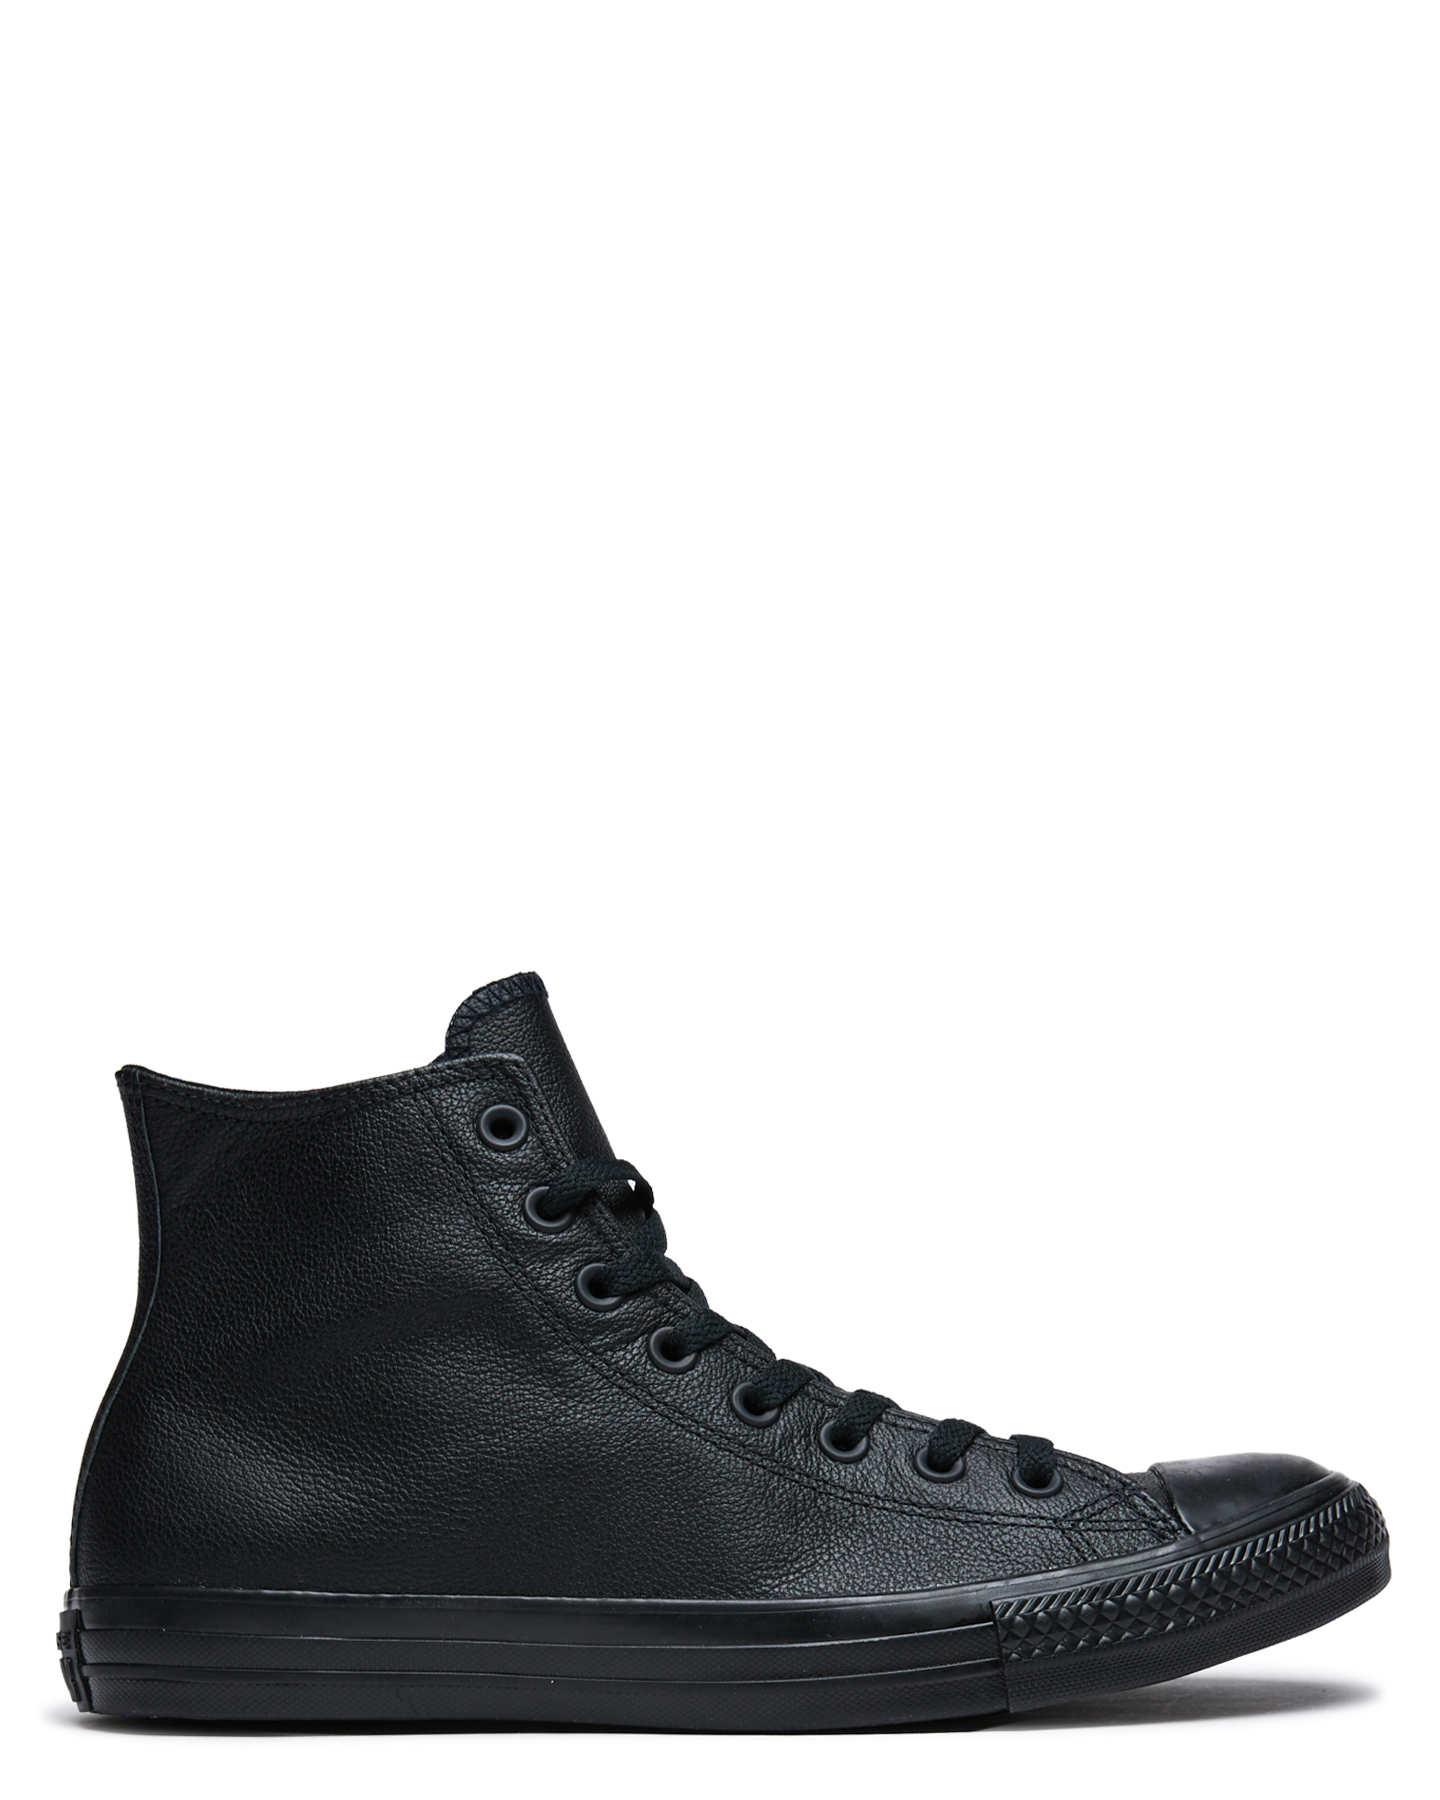 converse all star hi leather sneaker